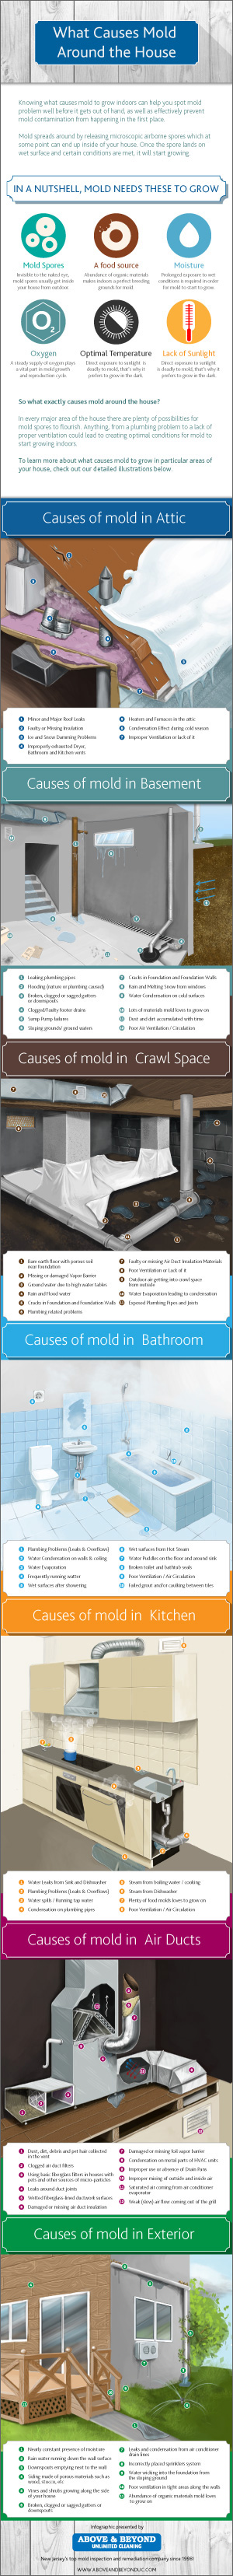 Inforaphic: What causes mold around the house